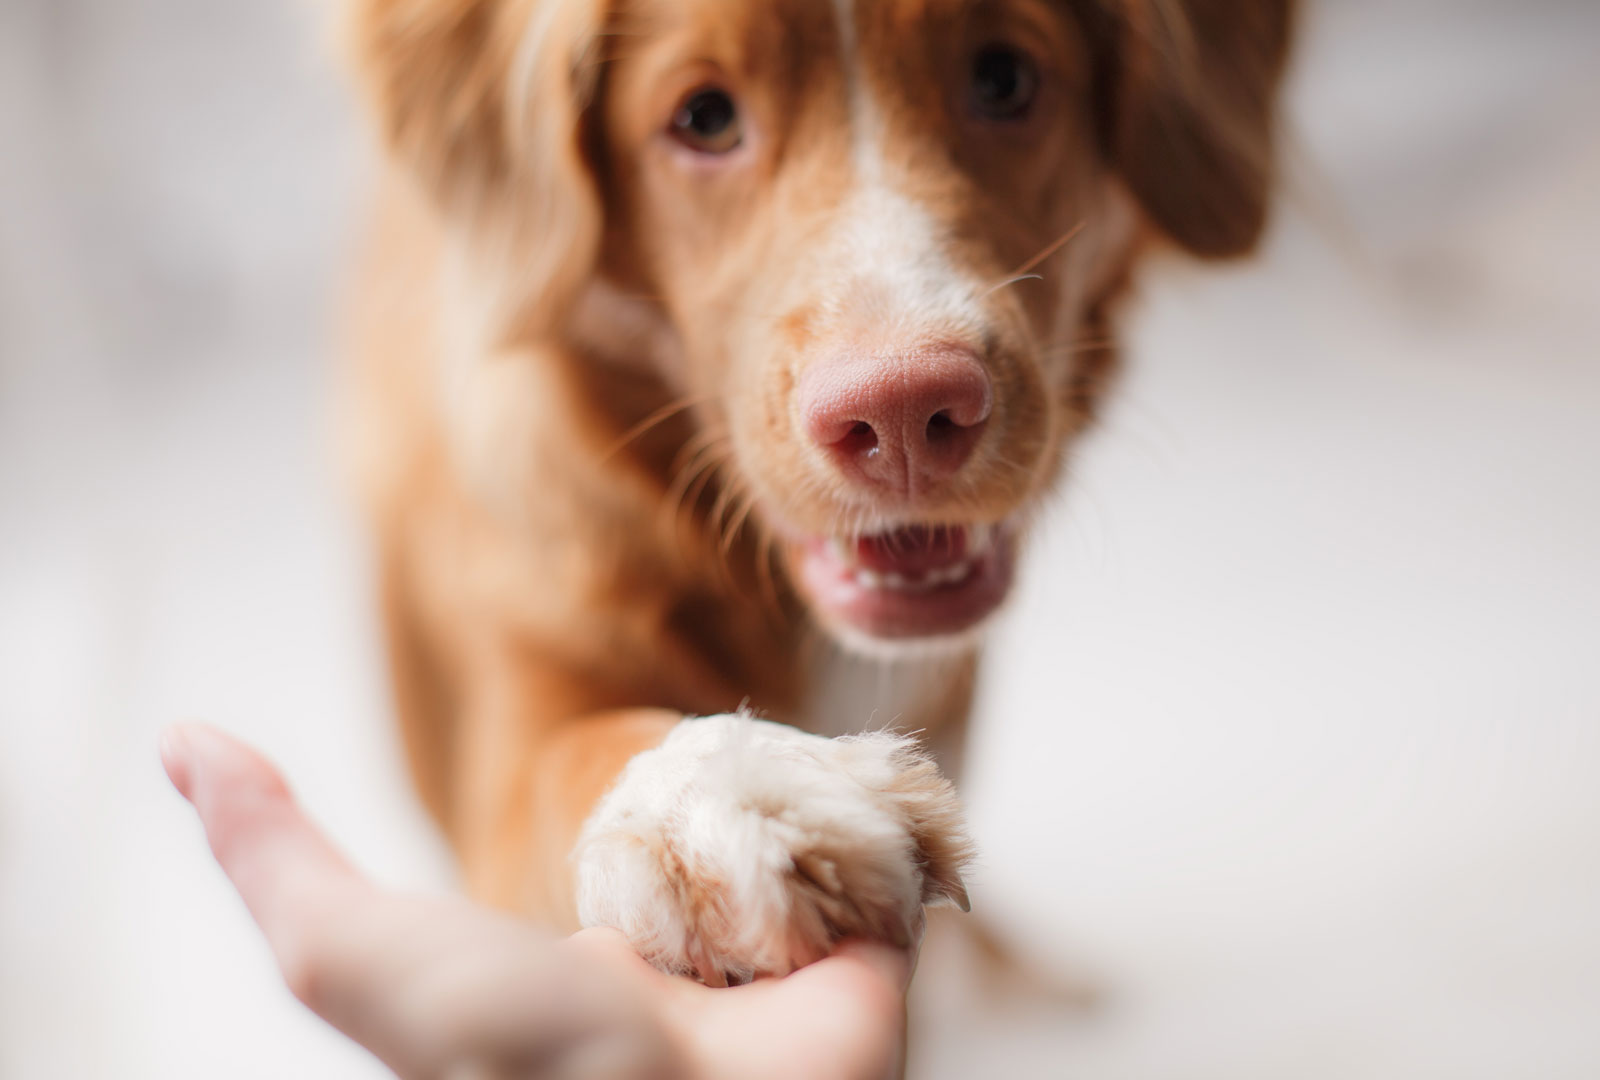 Dog putting its paw in a person's hand